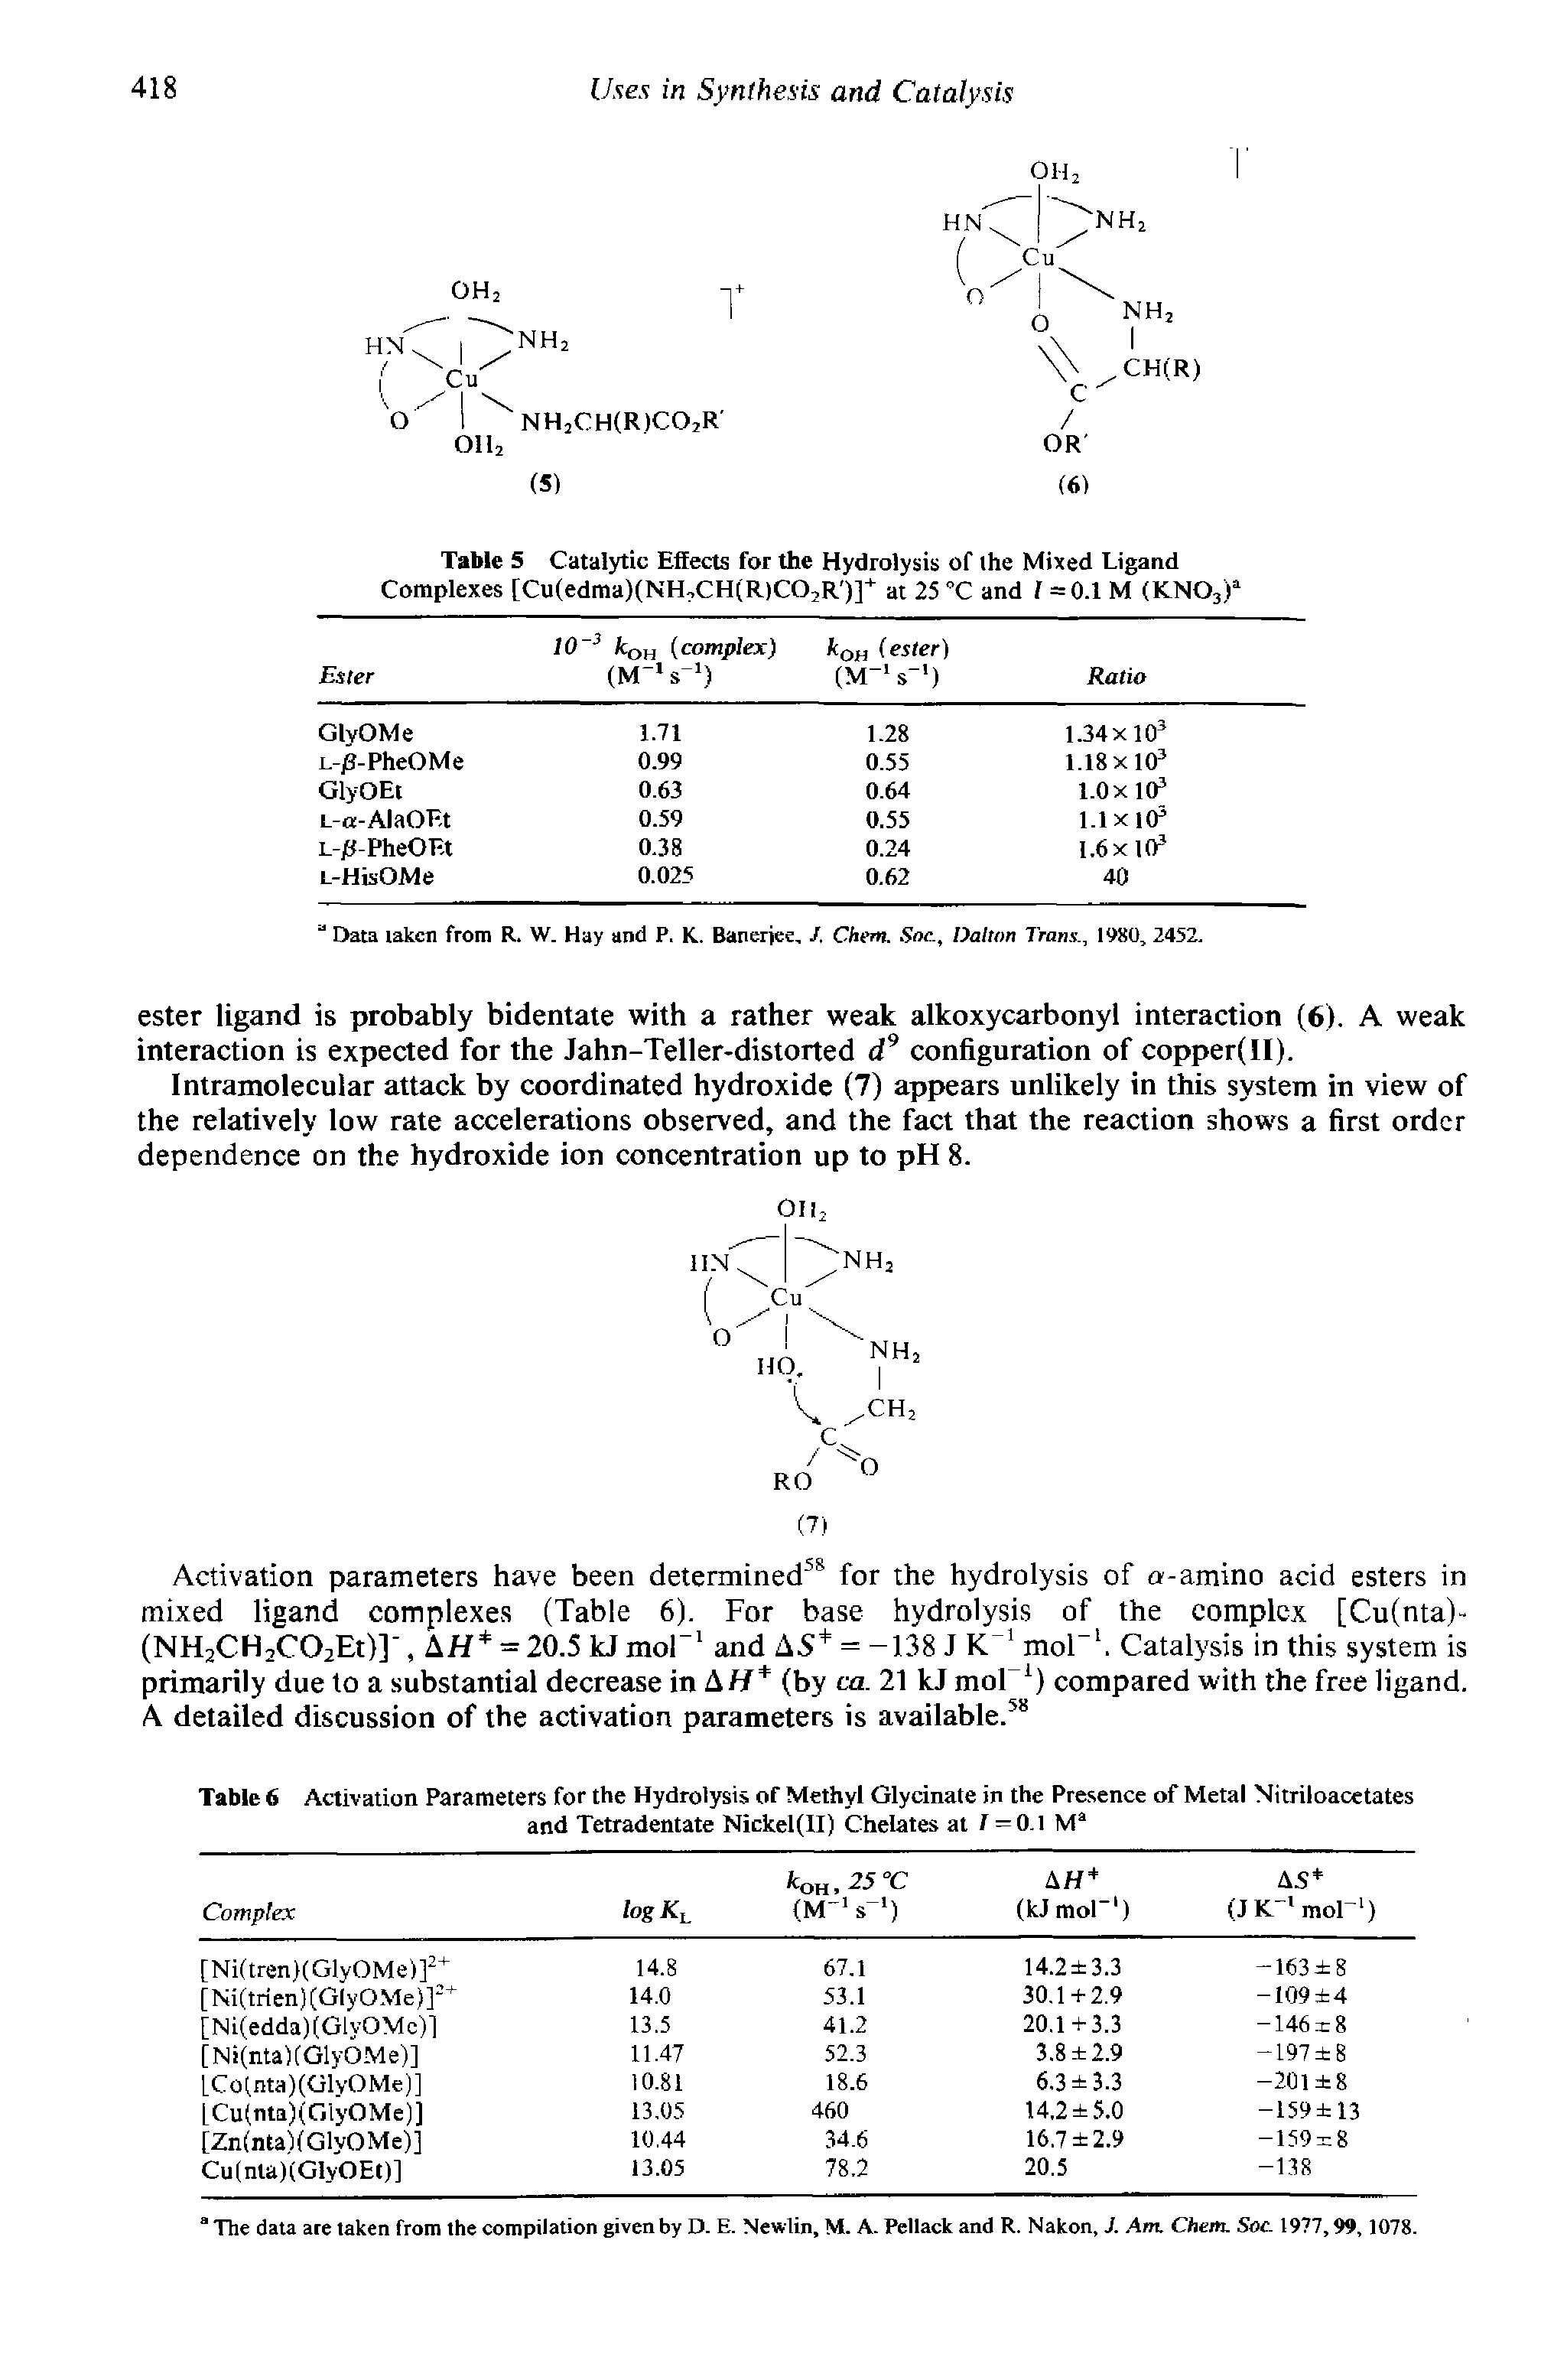 Table 6 Activation Parameters for the Hydrolysis of Methyl Glycinate in the Presence of Metal Nitriloacetates and Tetradentate Nickel(ll) Chelates at 1 = 0.1 M ...